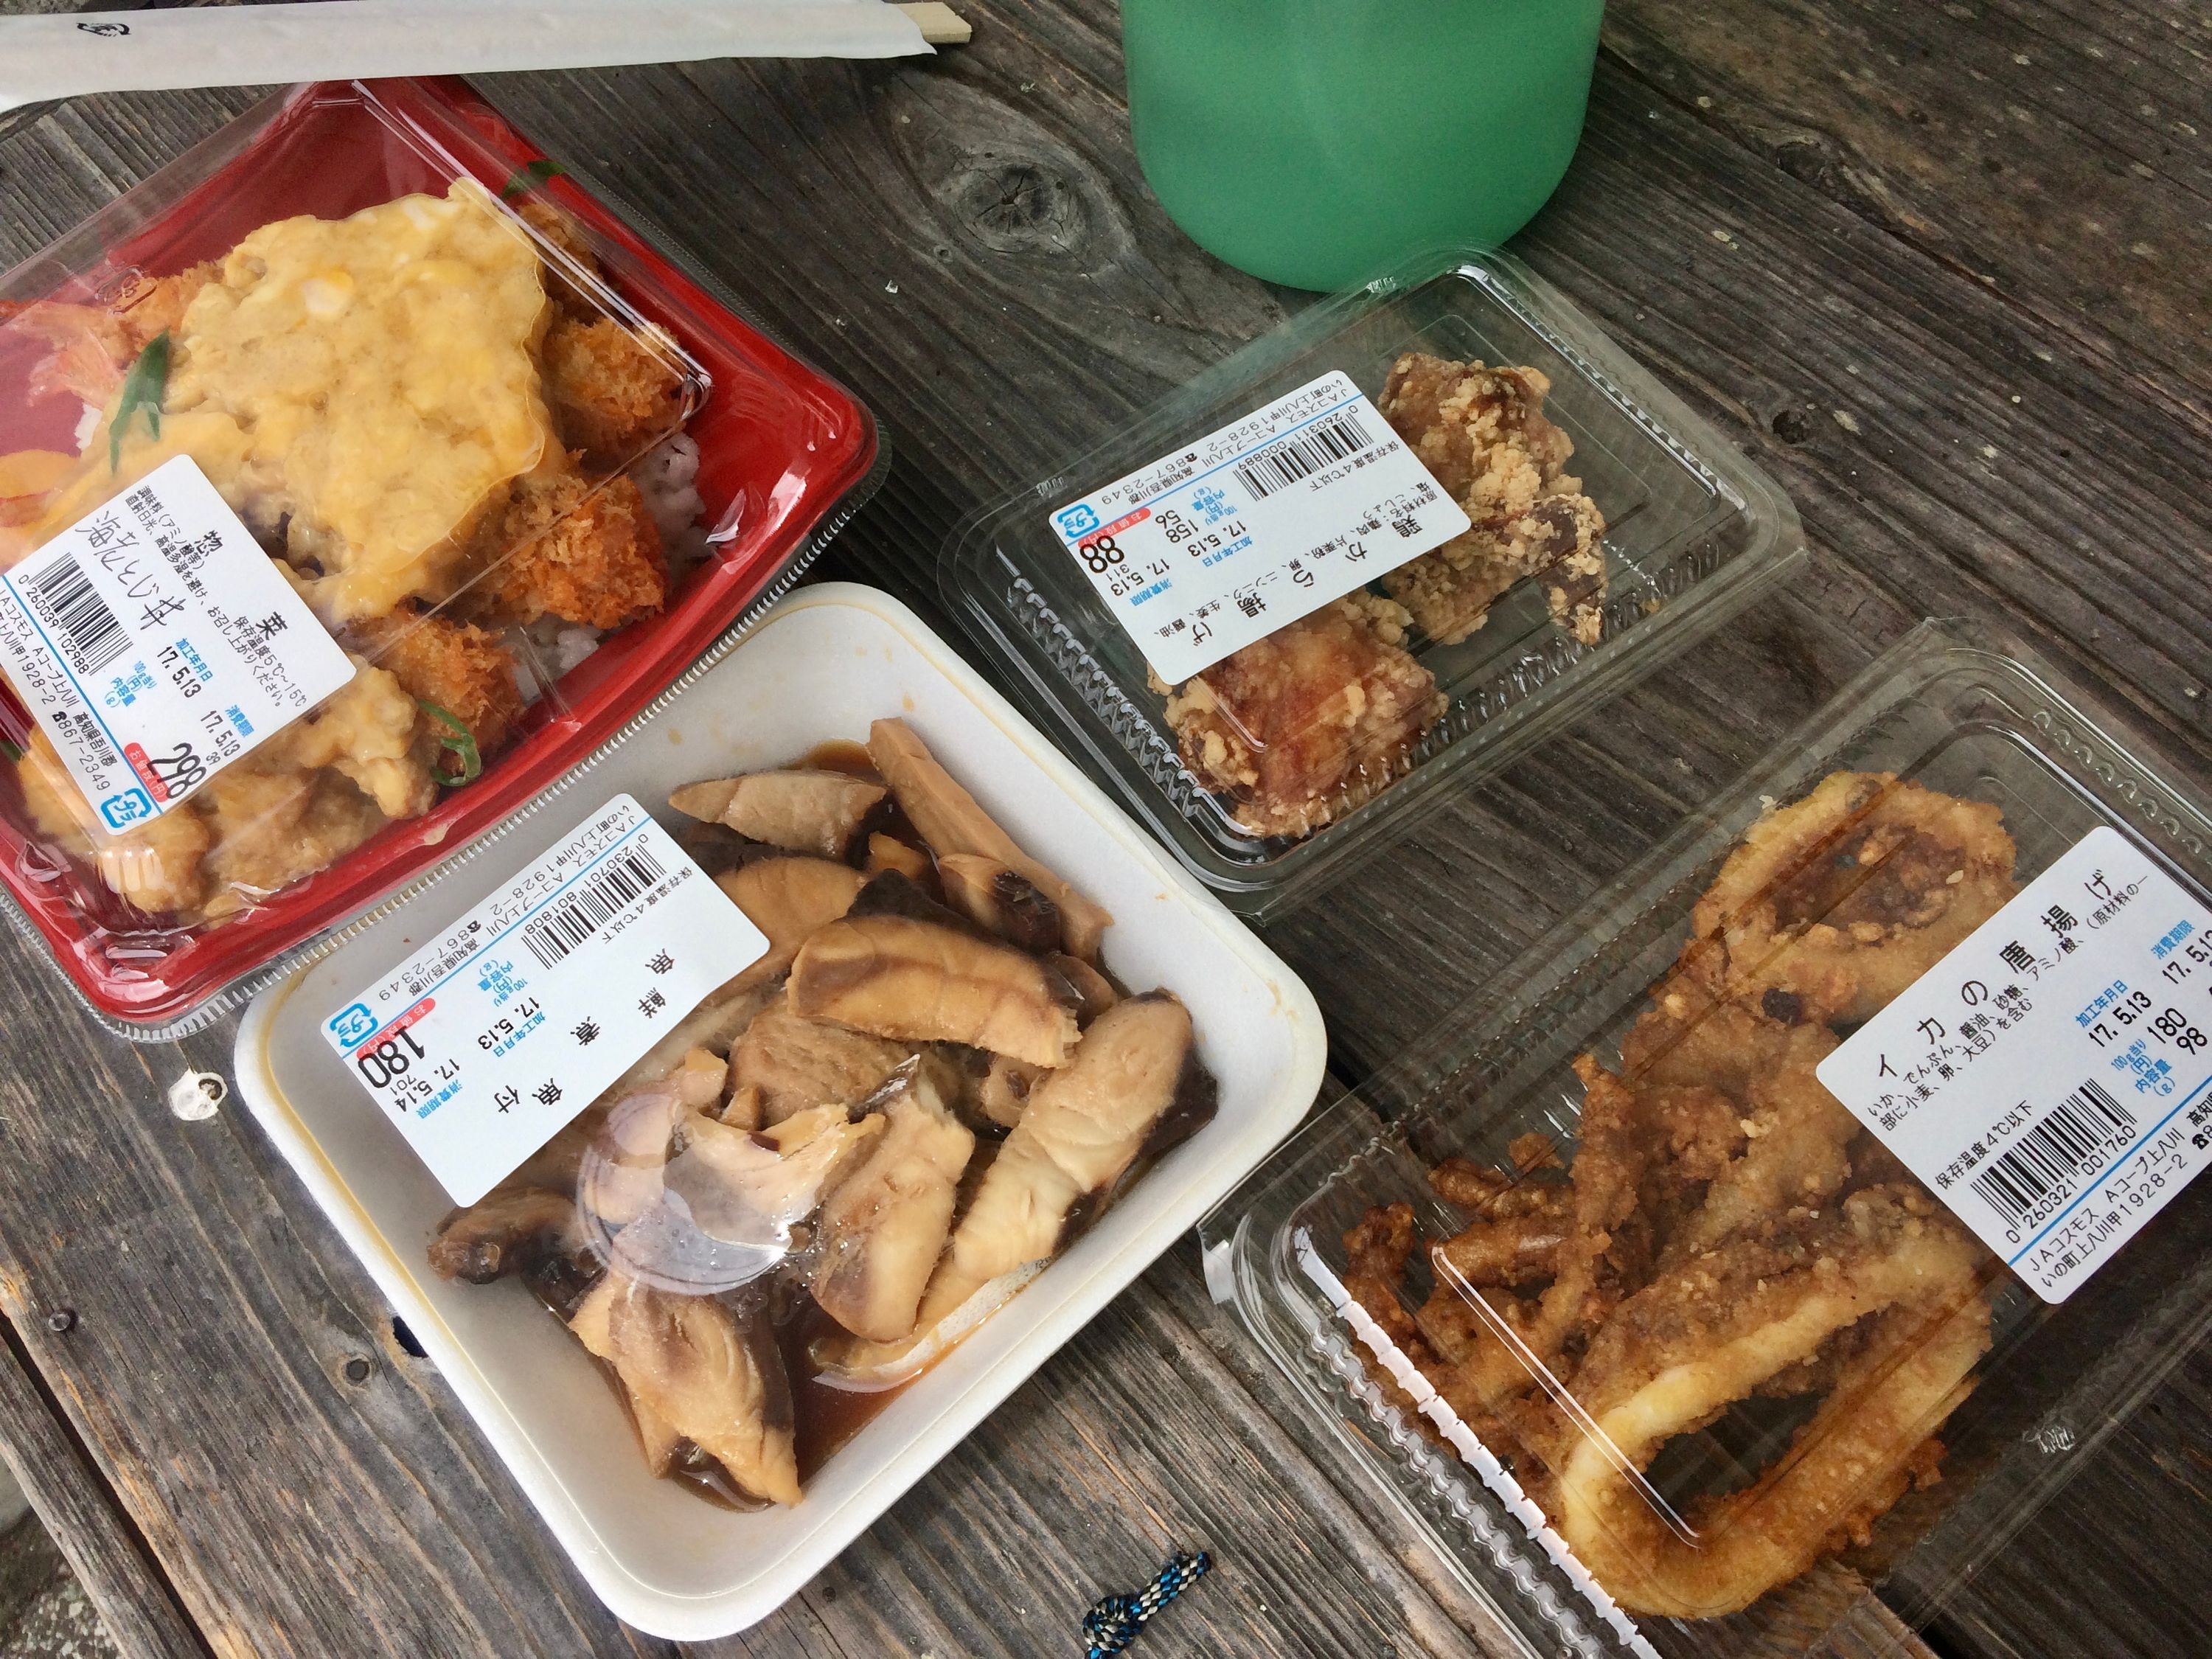 Several plastic boxes of fried convenience food store laid out on a bench, with a water bottle visible in the background.